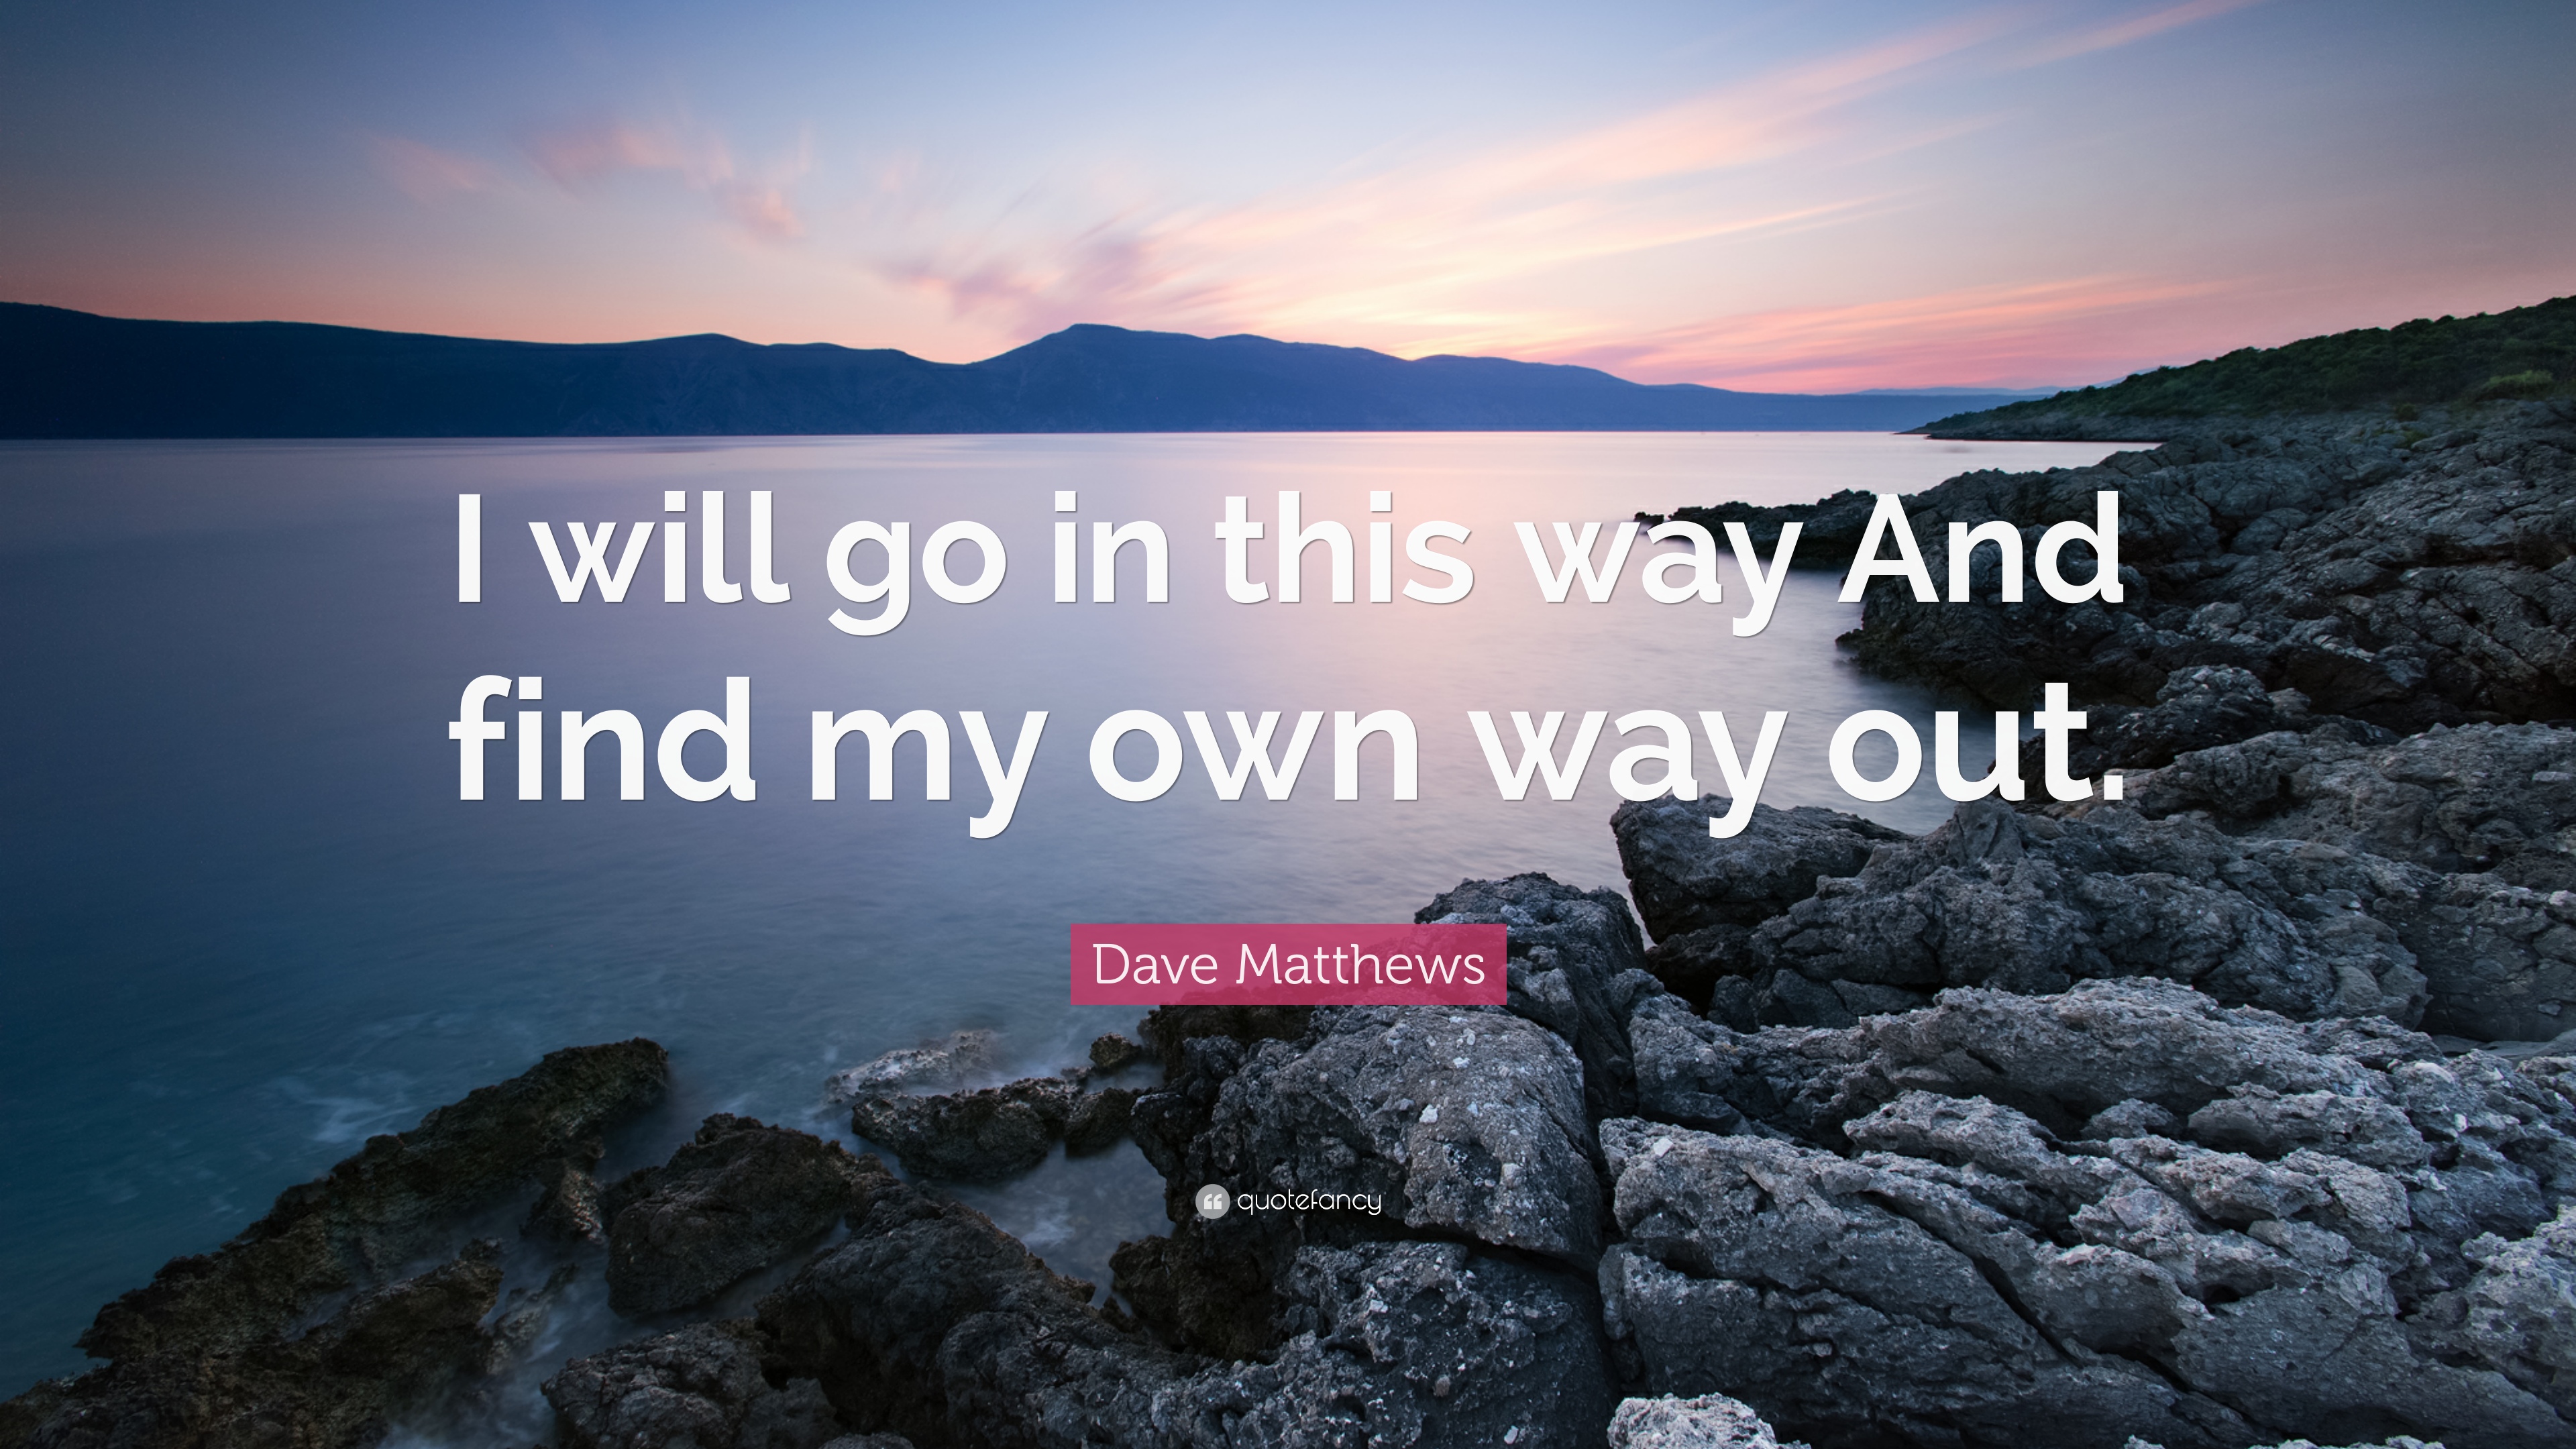 Dave Matthews Quote: “I will go in this way And find my own way out ...